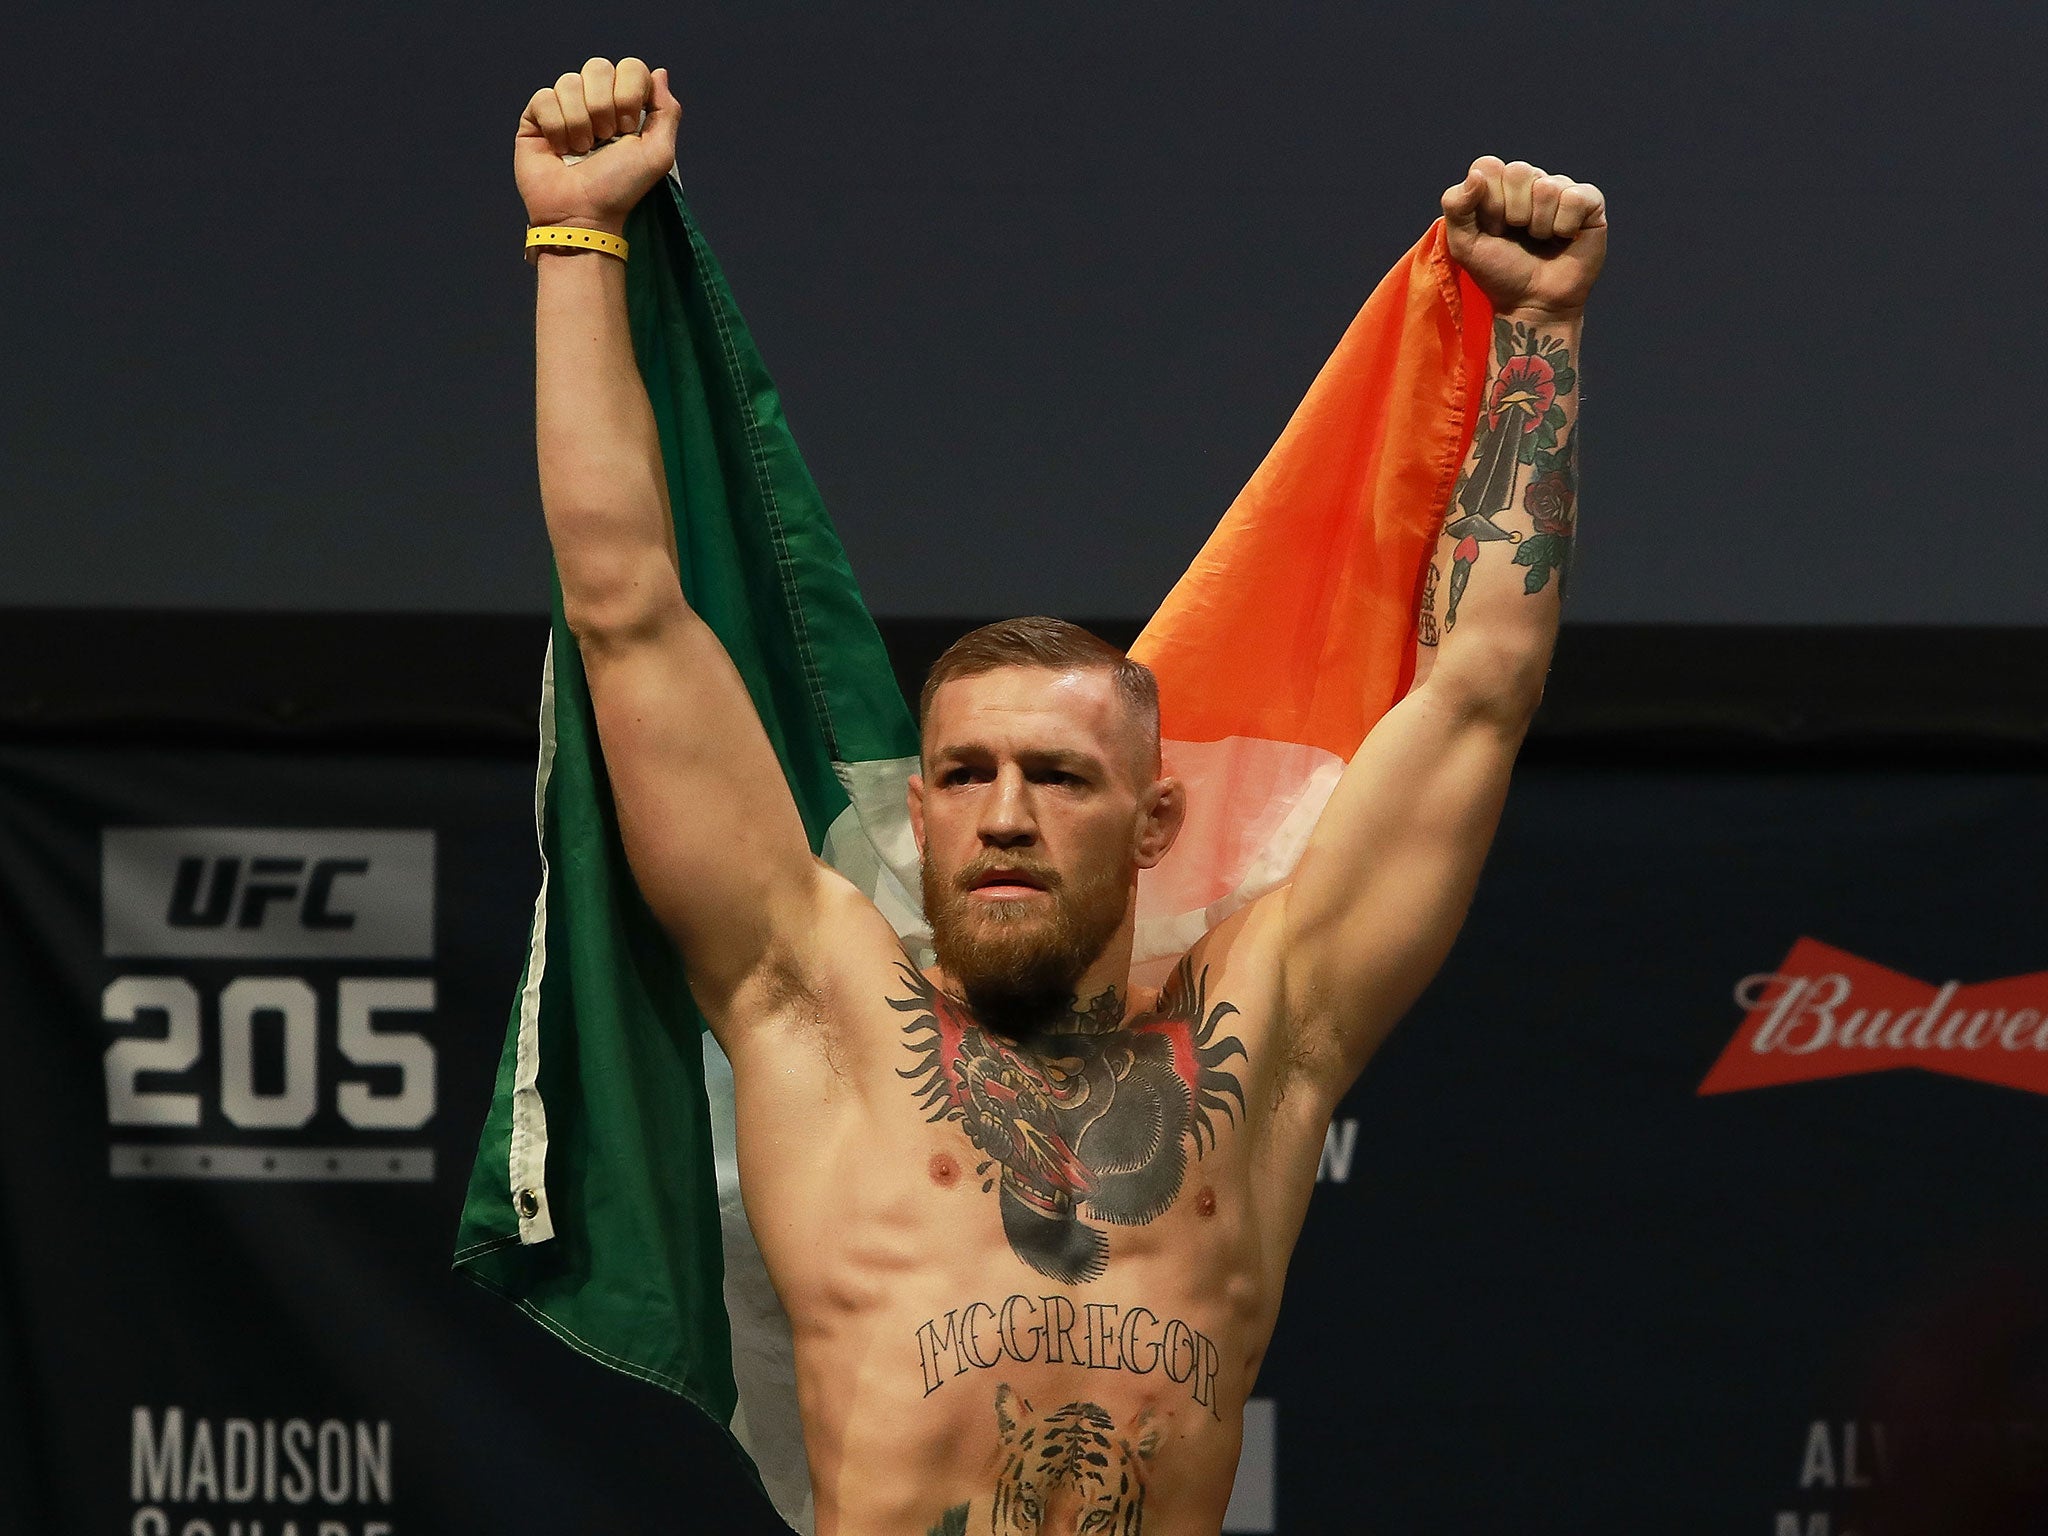 Conor McGregor's reign as a dual-division champion lasted little more than two weeks